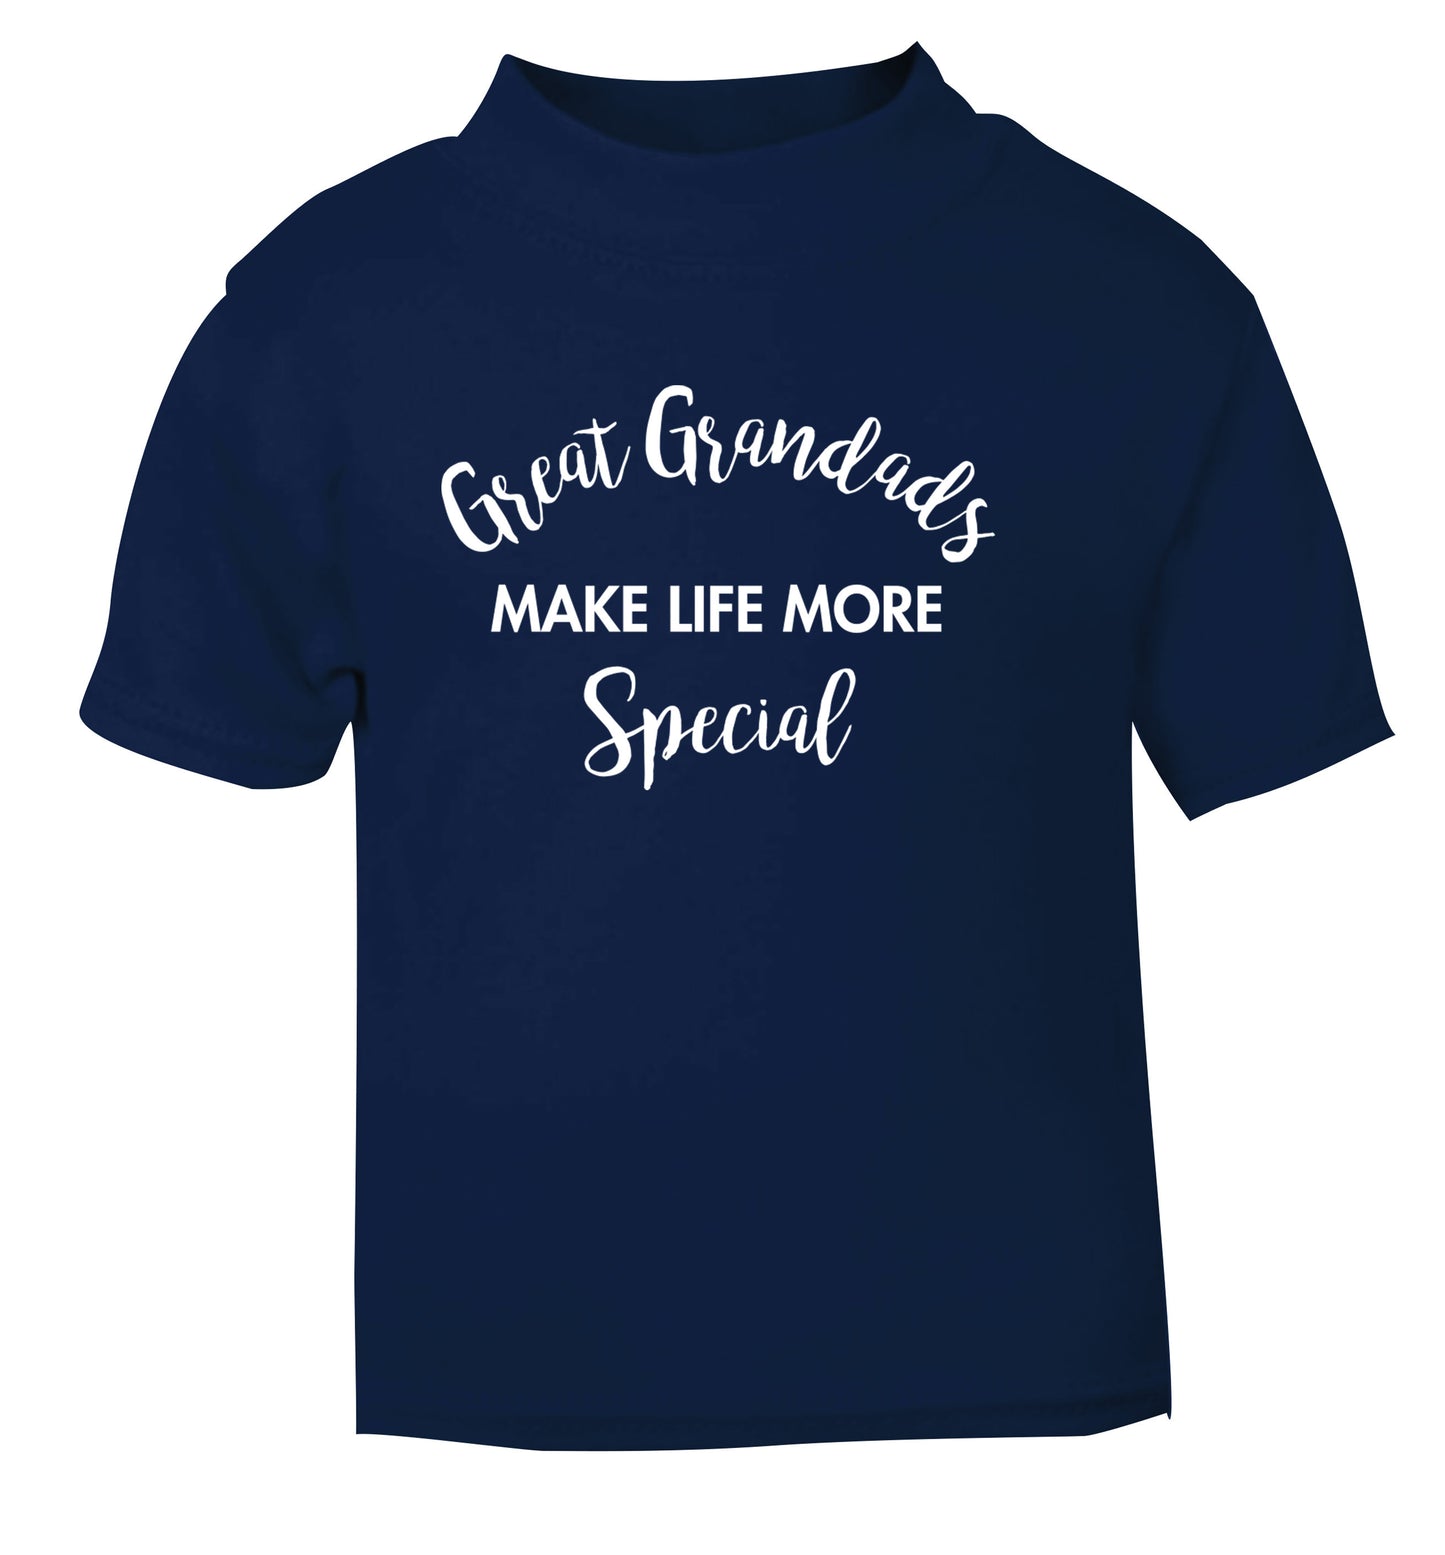 Great Grandads make life more special navy Baby Toddler Tshirt 2 Years